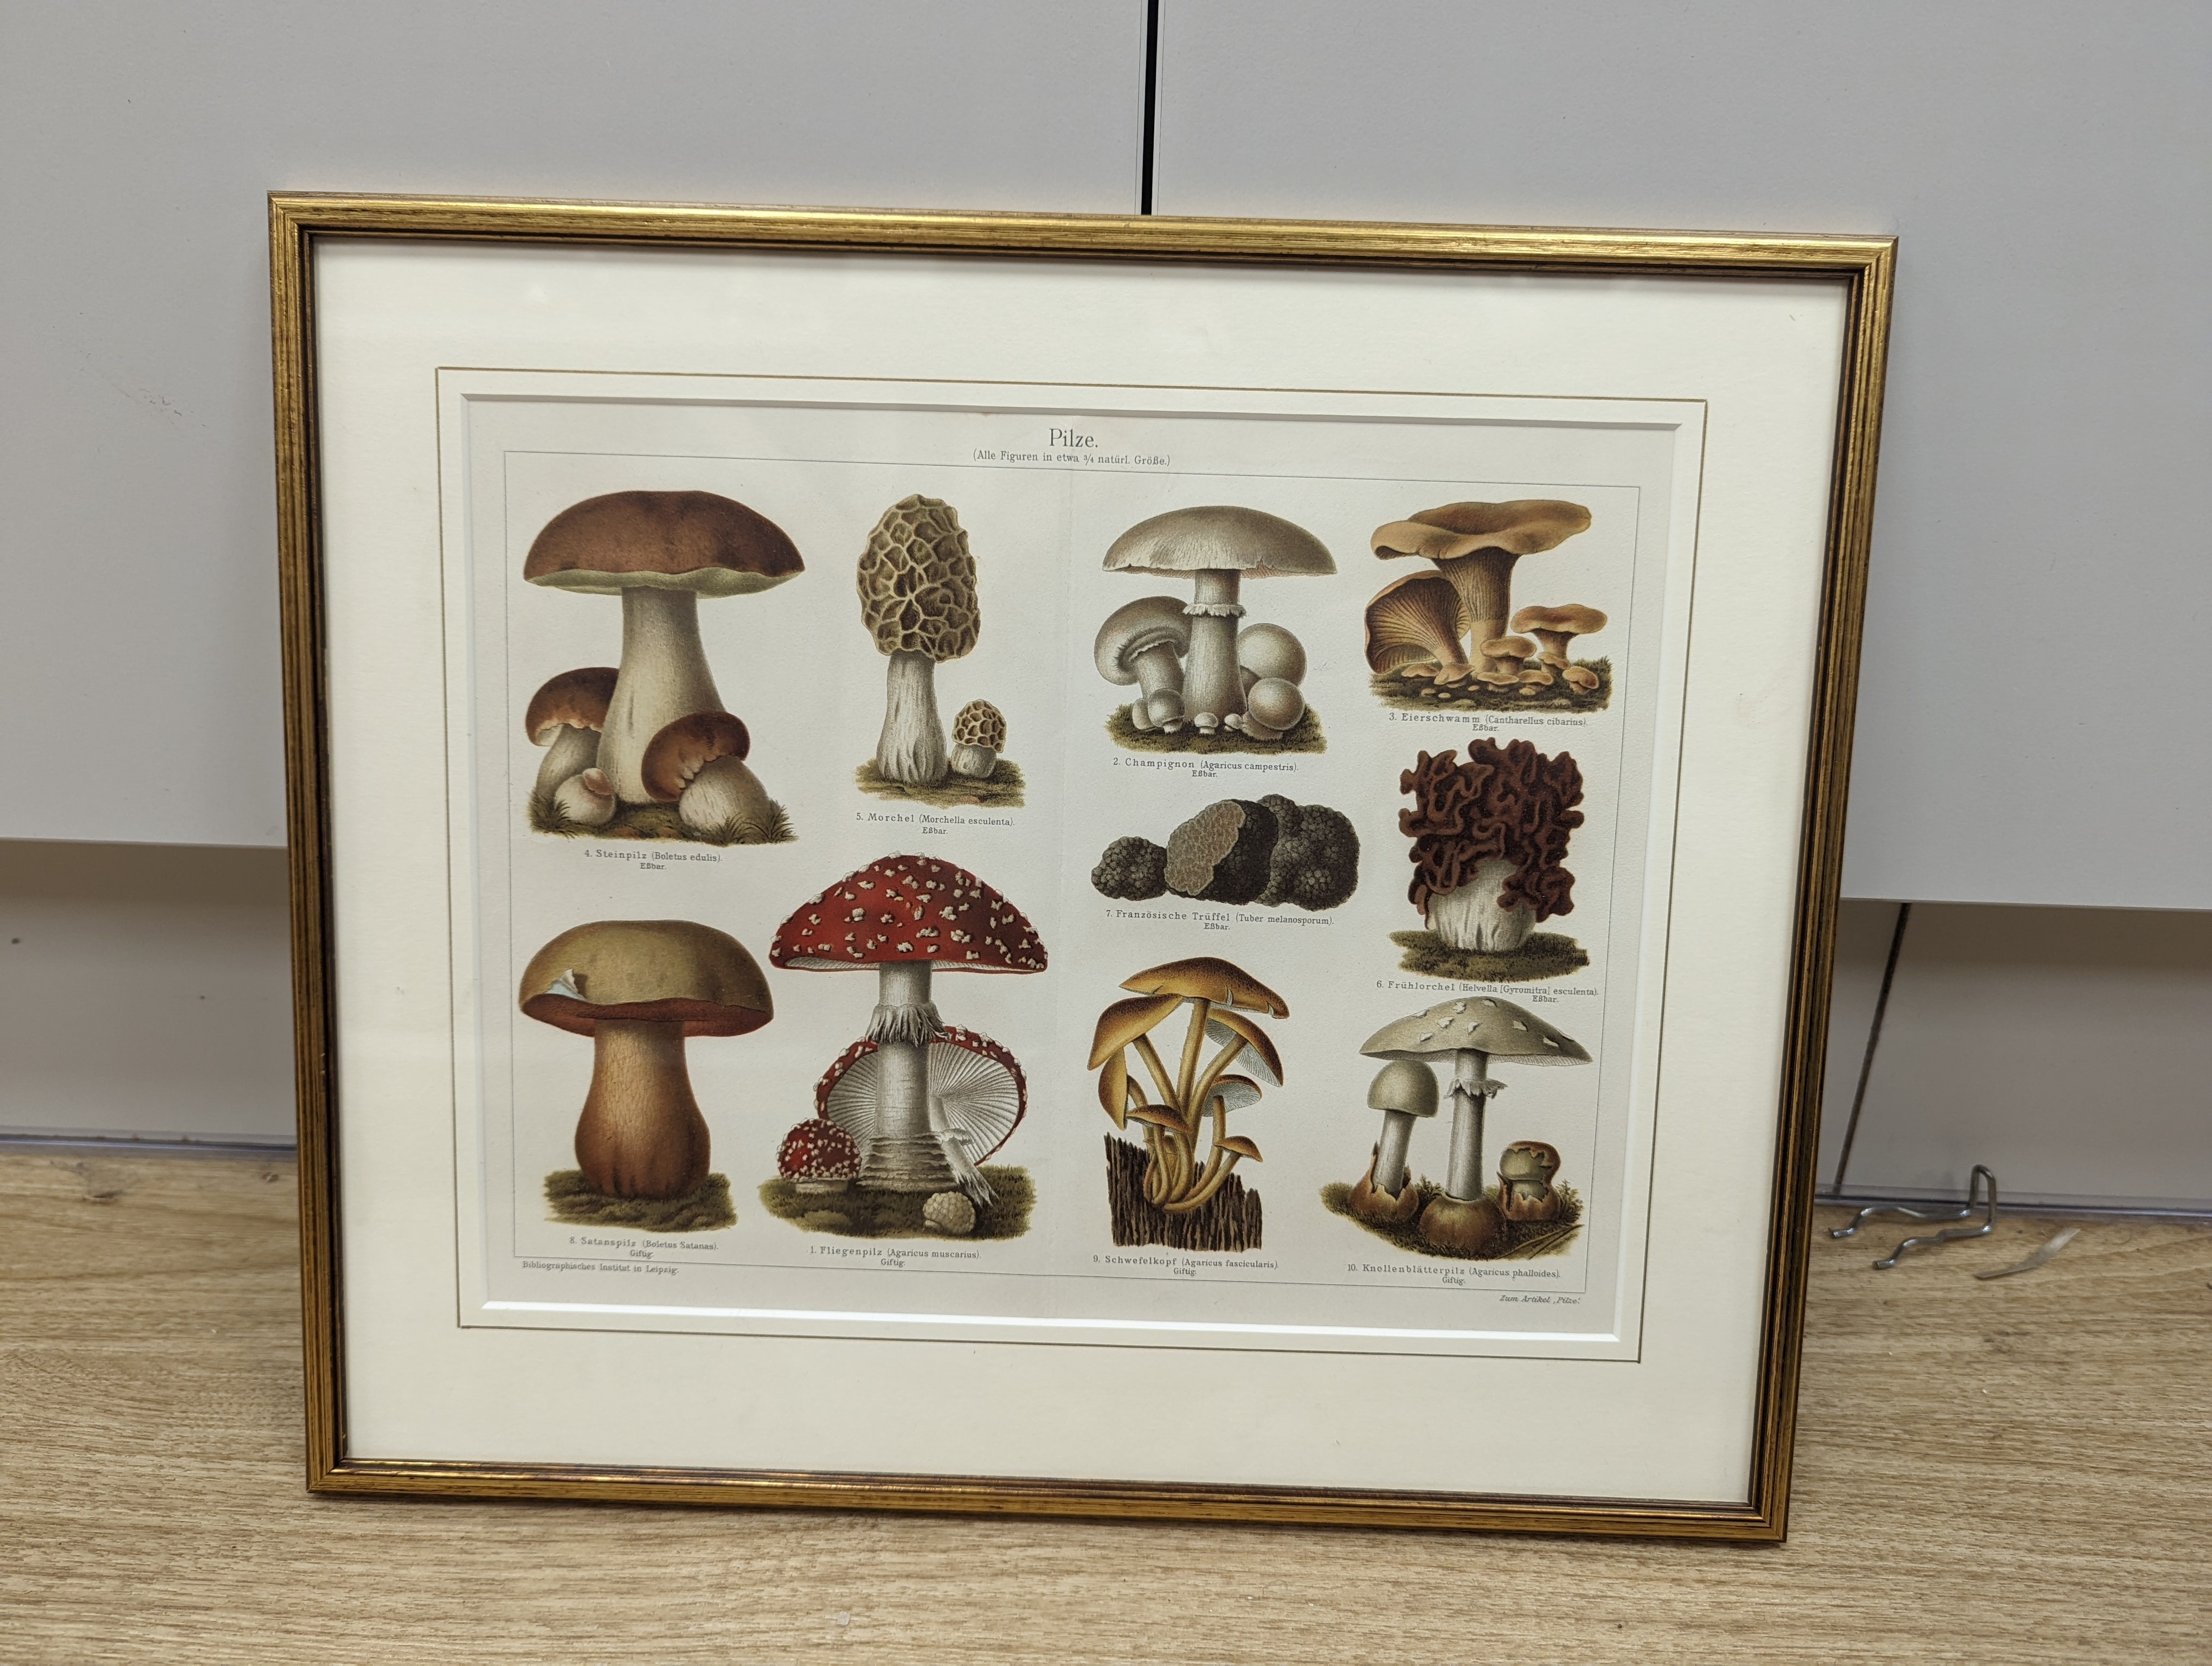 Bibliographisches Institut, Leipzig, sixteen assorted chromolithographs, Illustrations of orchids, fungi and other flora and fauna, 22 x 29cm